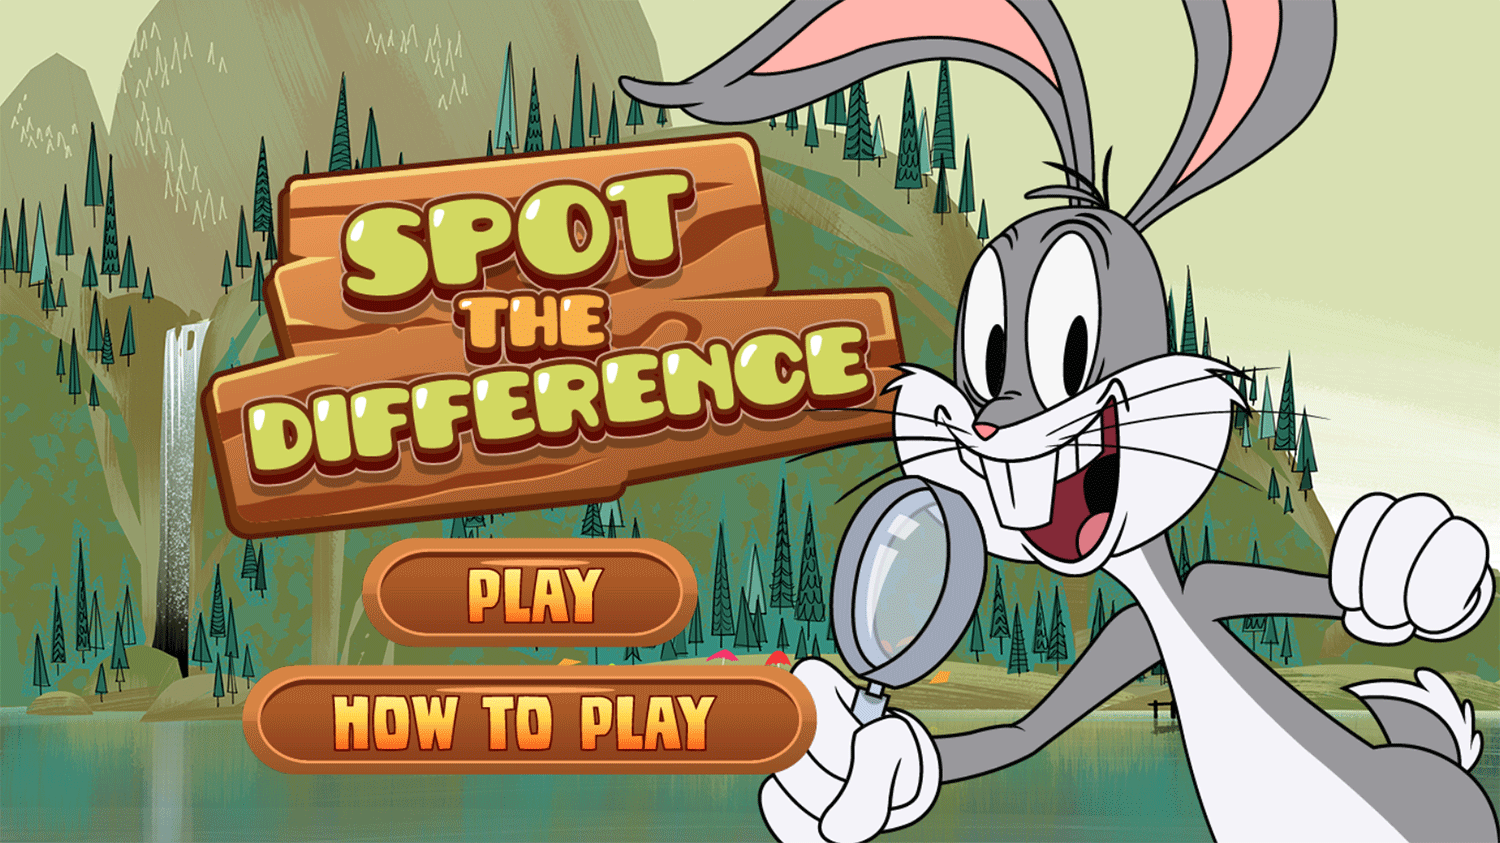 Bugs Bunny Spot the Difference Welcome Screen Screenshot.